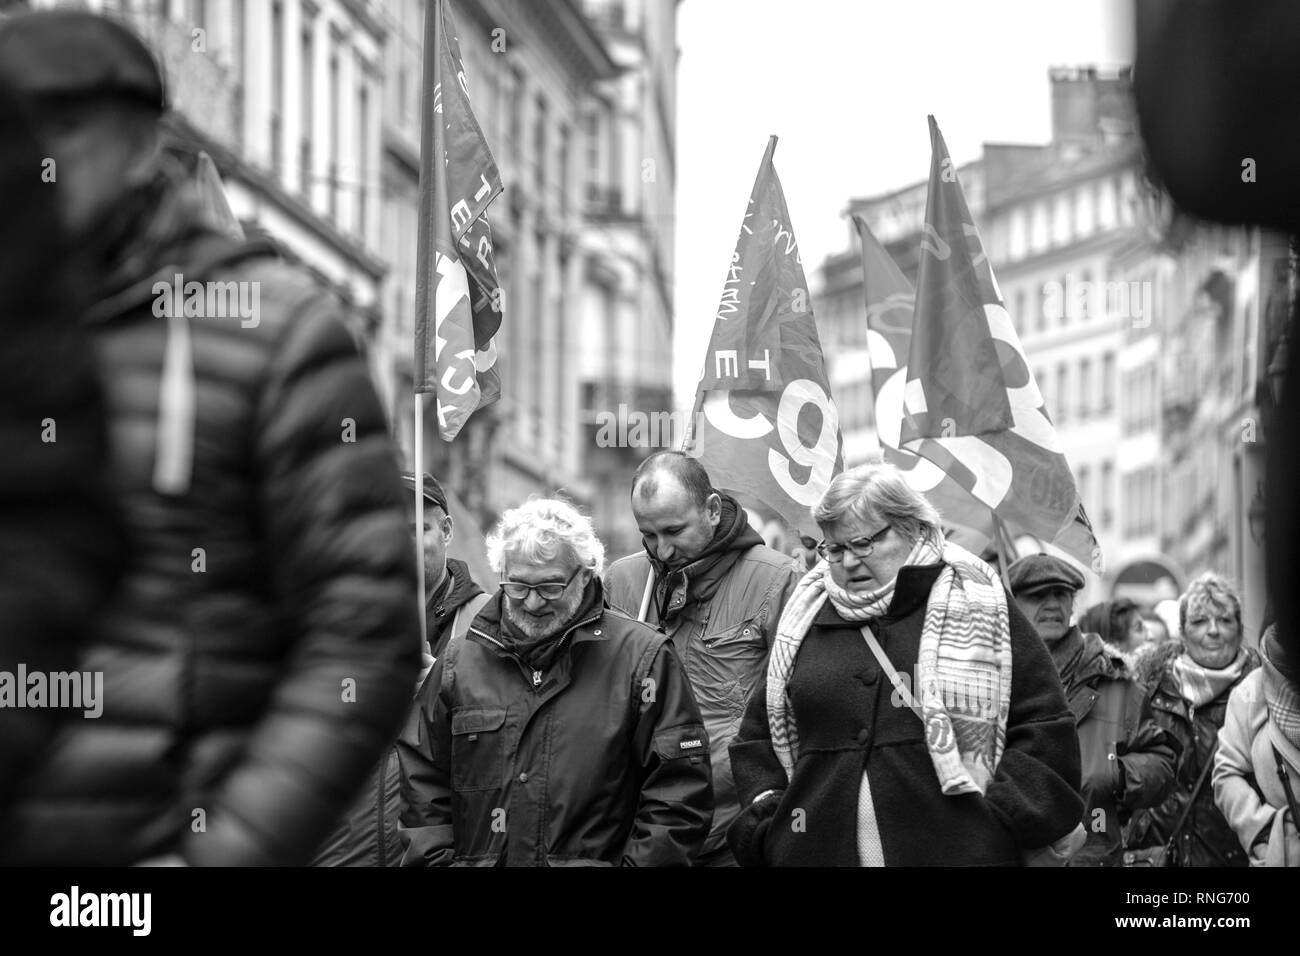 STRASBOURG, FRANCE - MAR 22, 2018: CGT General Confederation of Labour workers with placard at demonstration protest against Macron French government string of reforms - seniors in front of first row of protesters Stock Photo